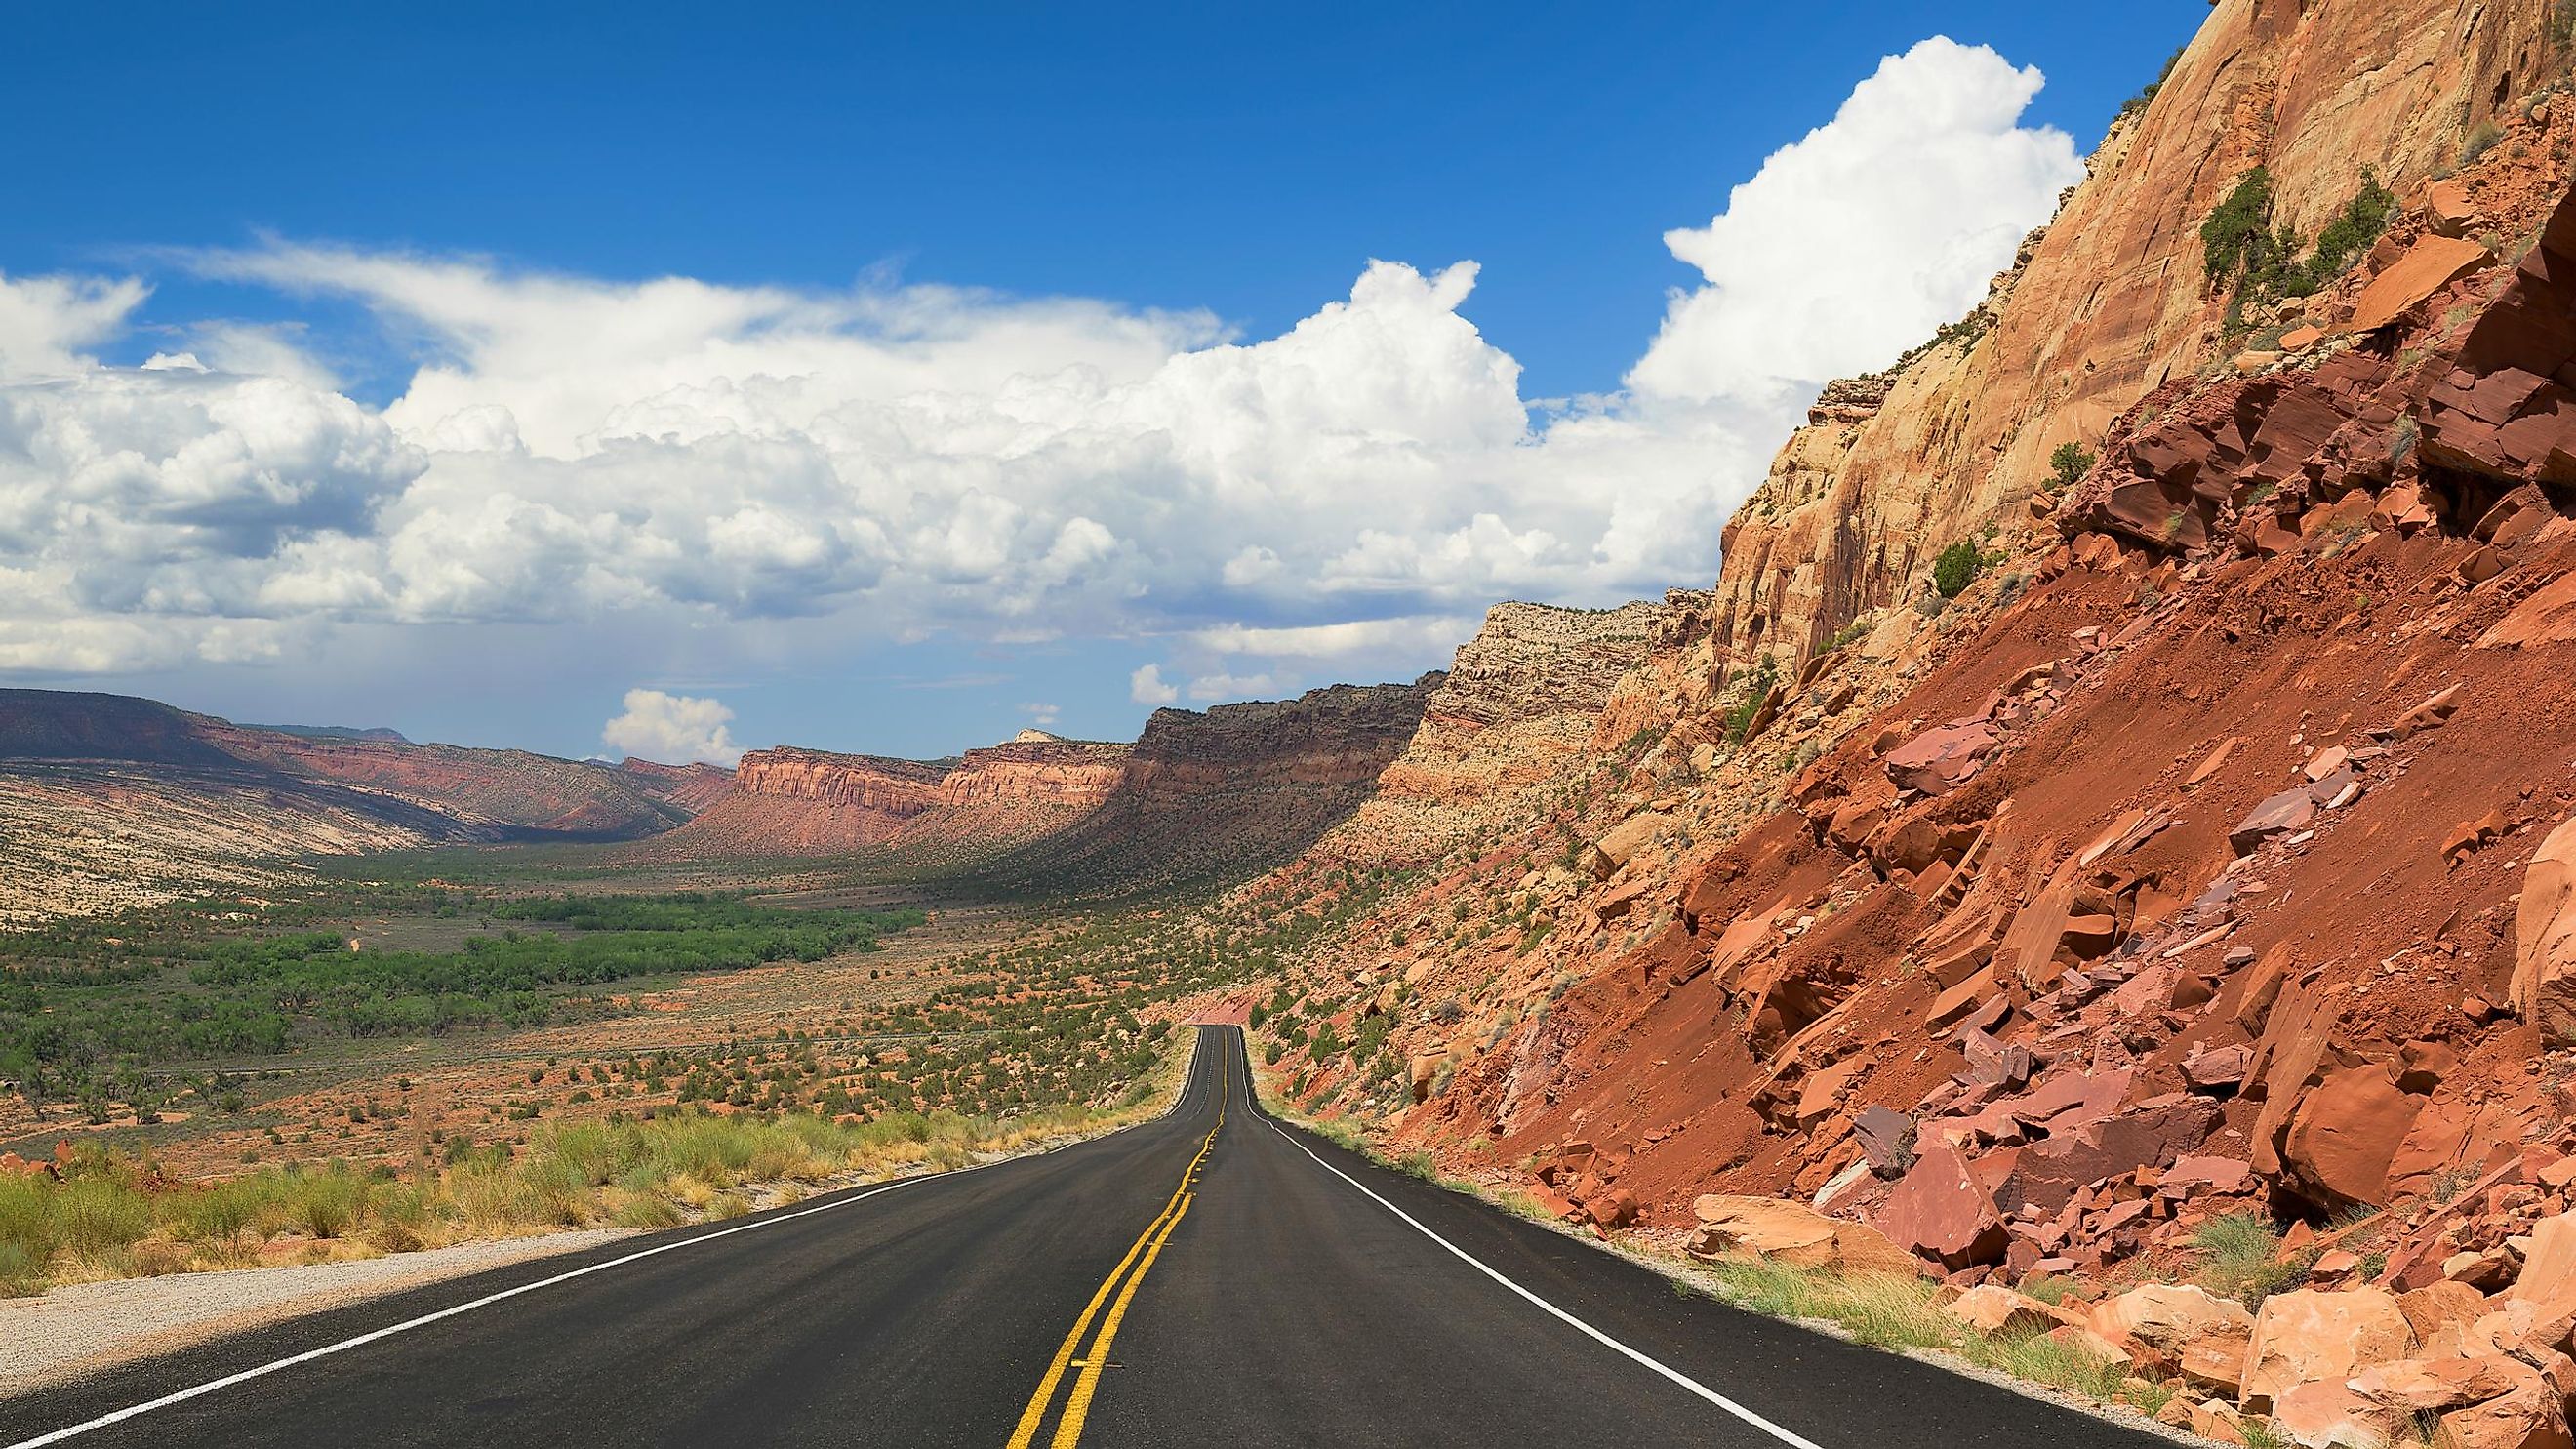 Where to go on Road Trip? The 10 most beautiful road trips in the